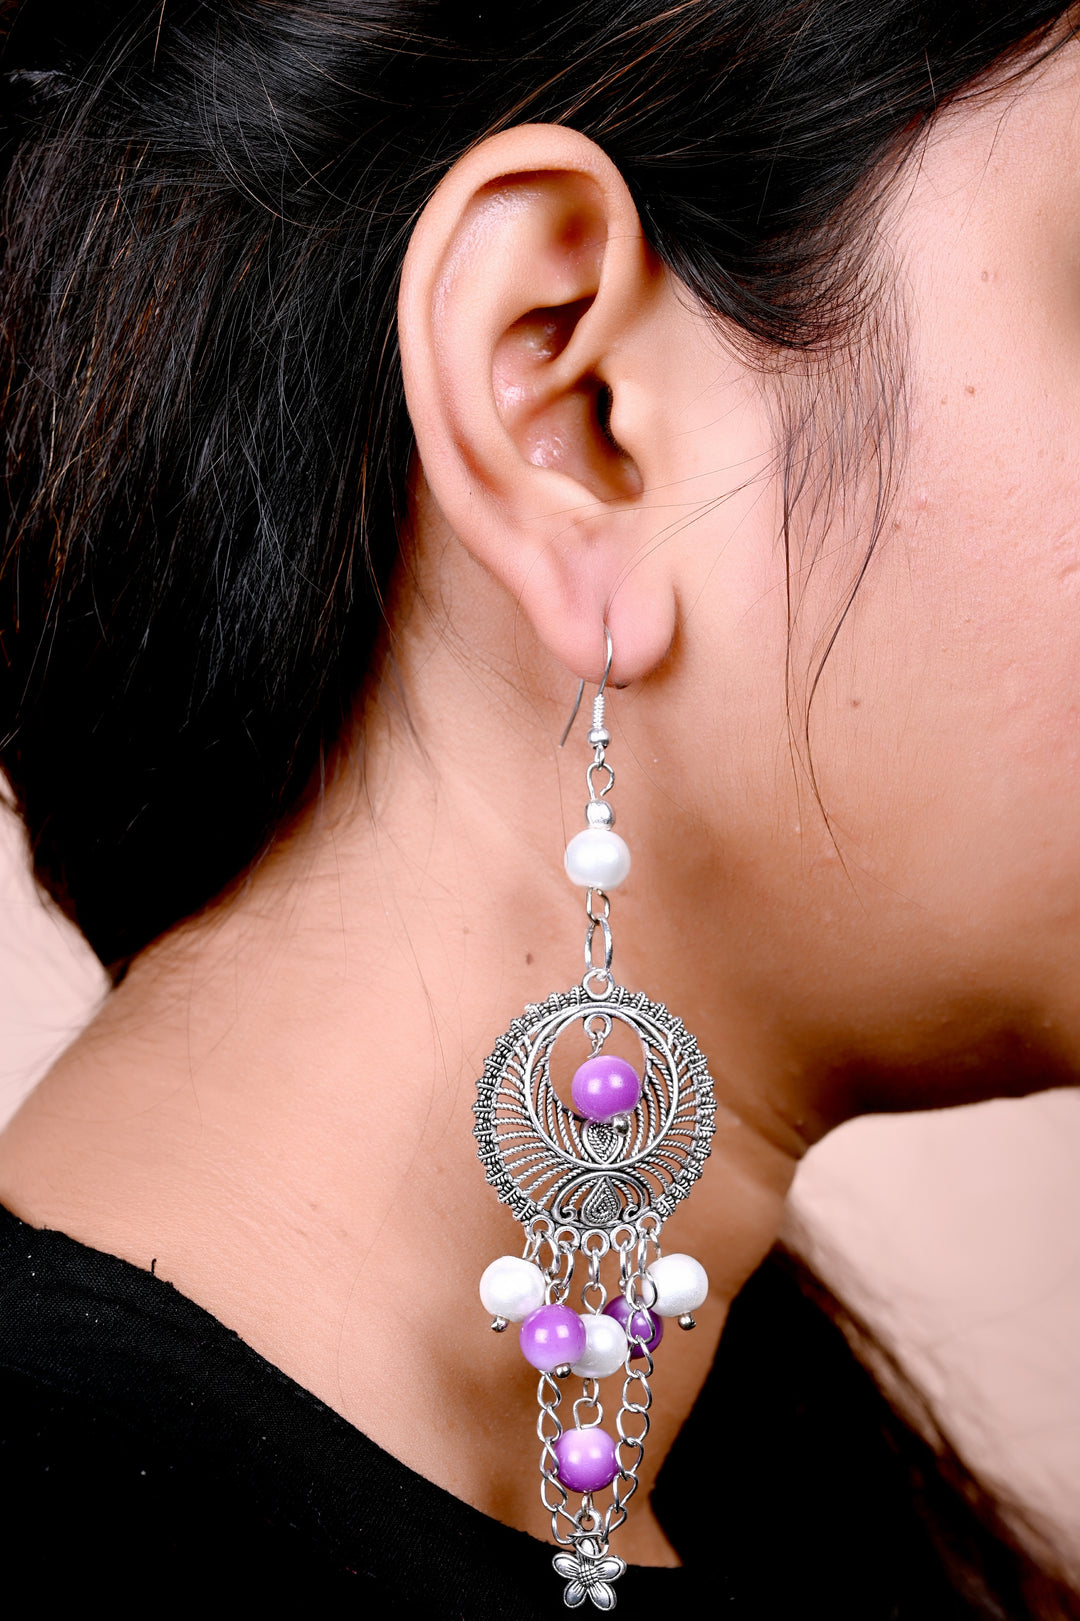 Metal Charm Earring Styled With Purple & White Pearl Beads